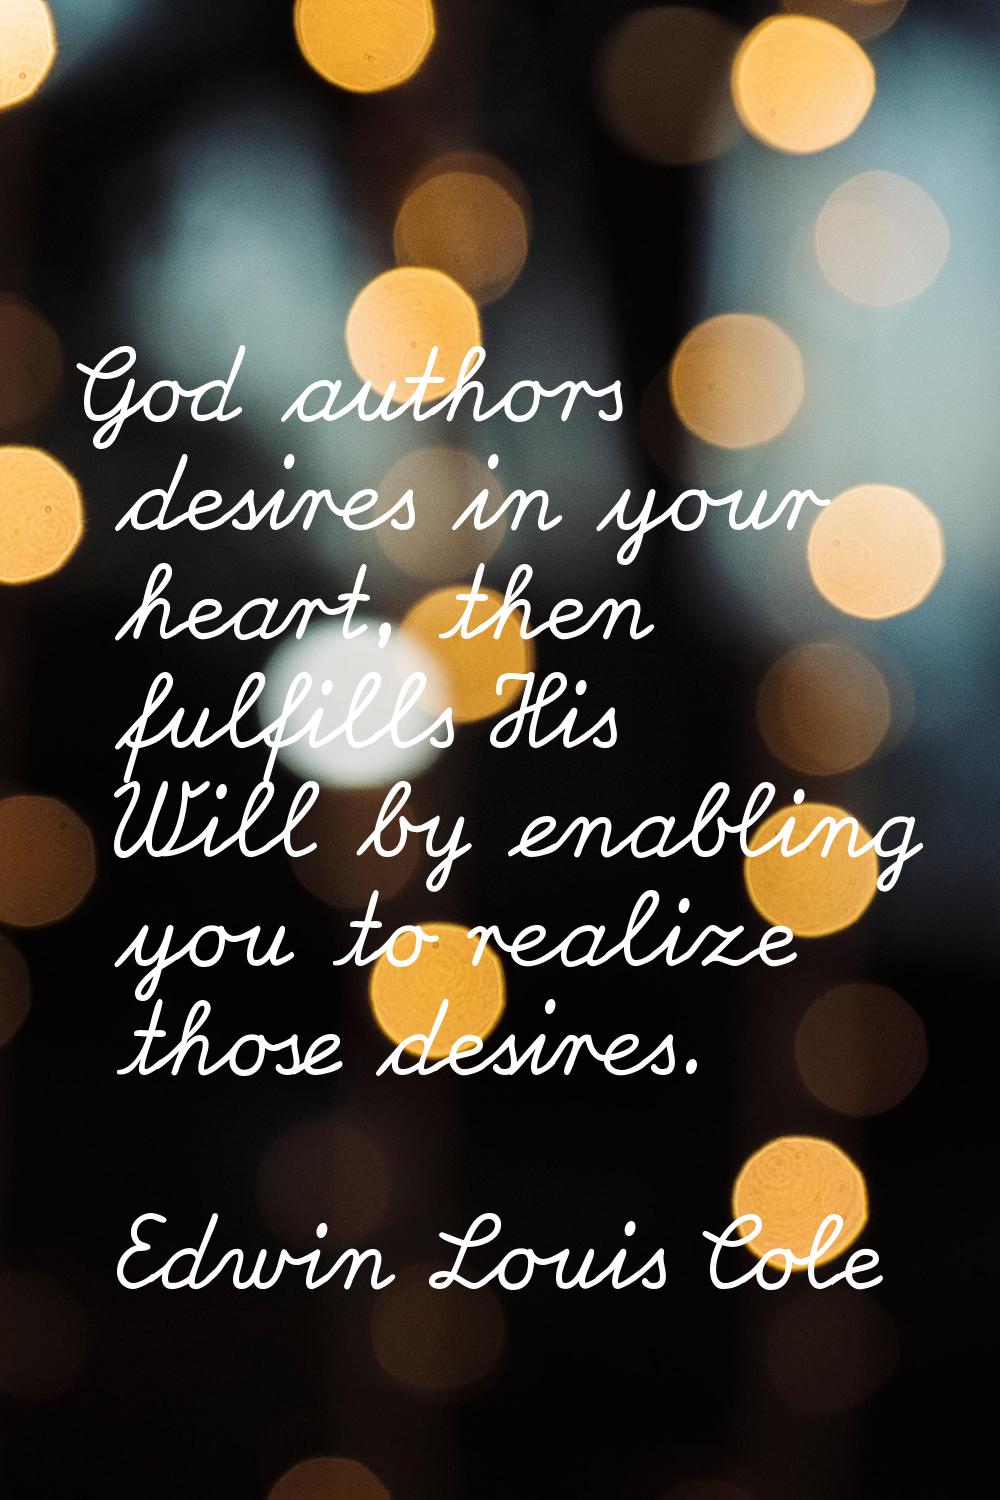 God authors desires in your heart, then fulfills His Will by enabling you to realize those desires.